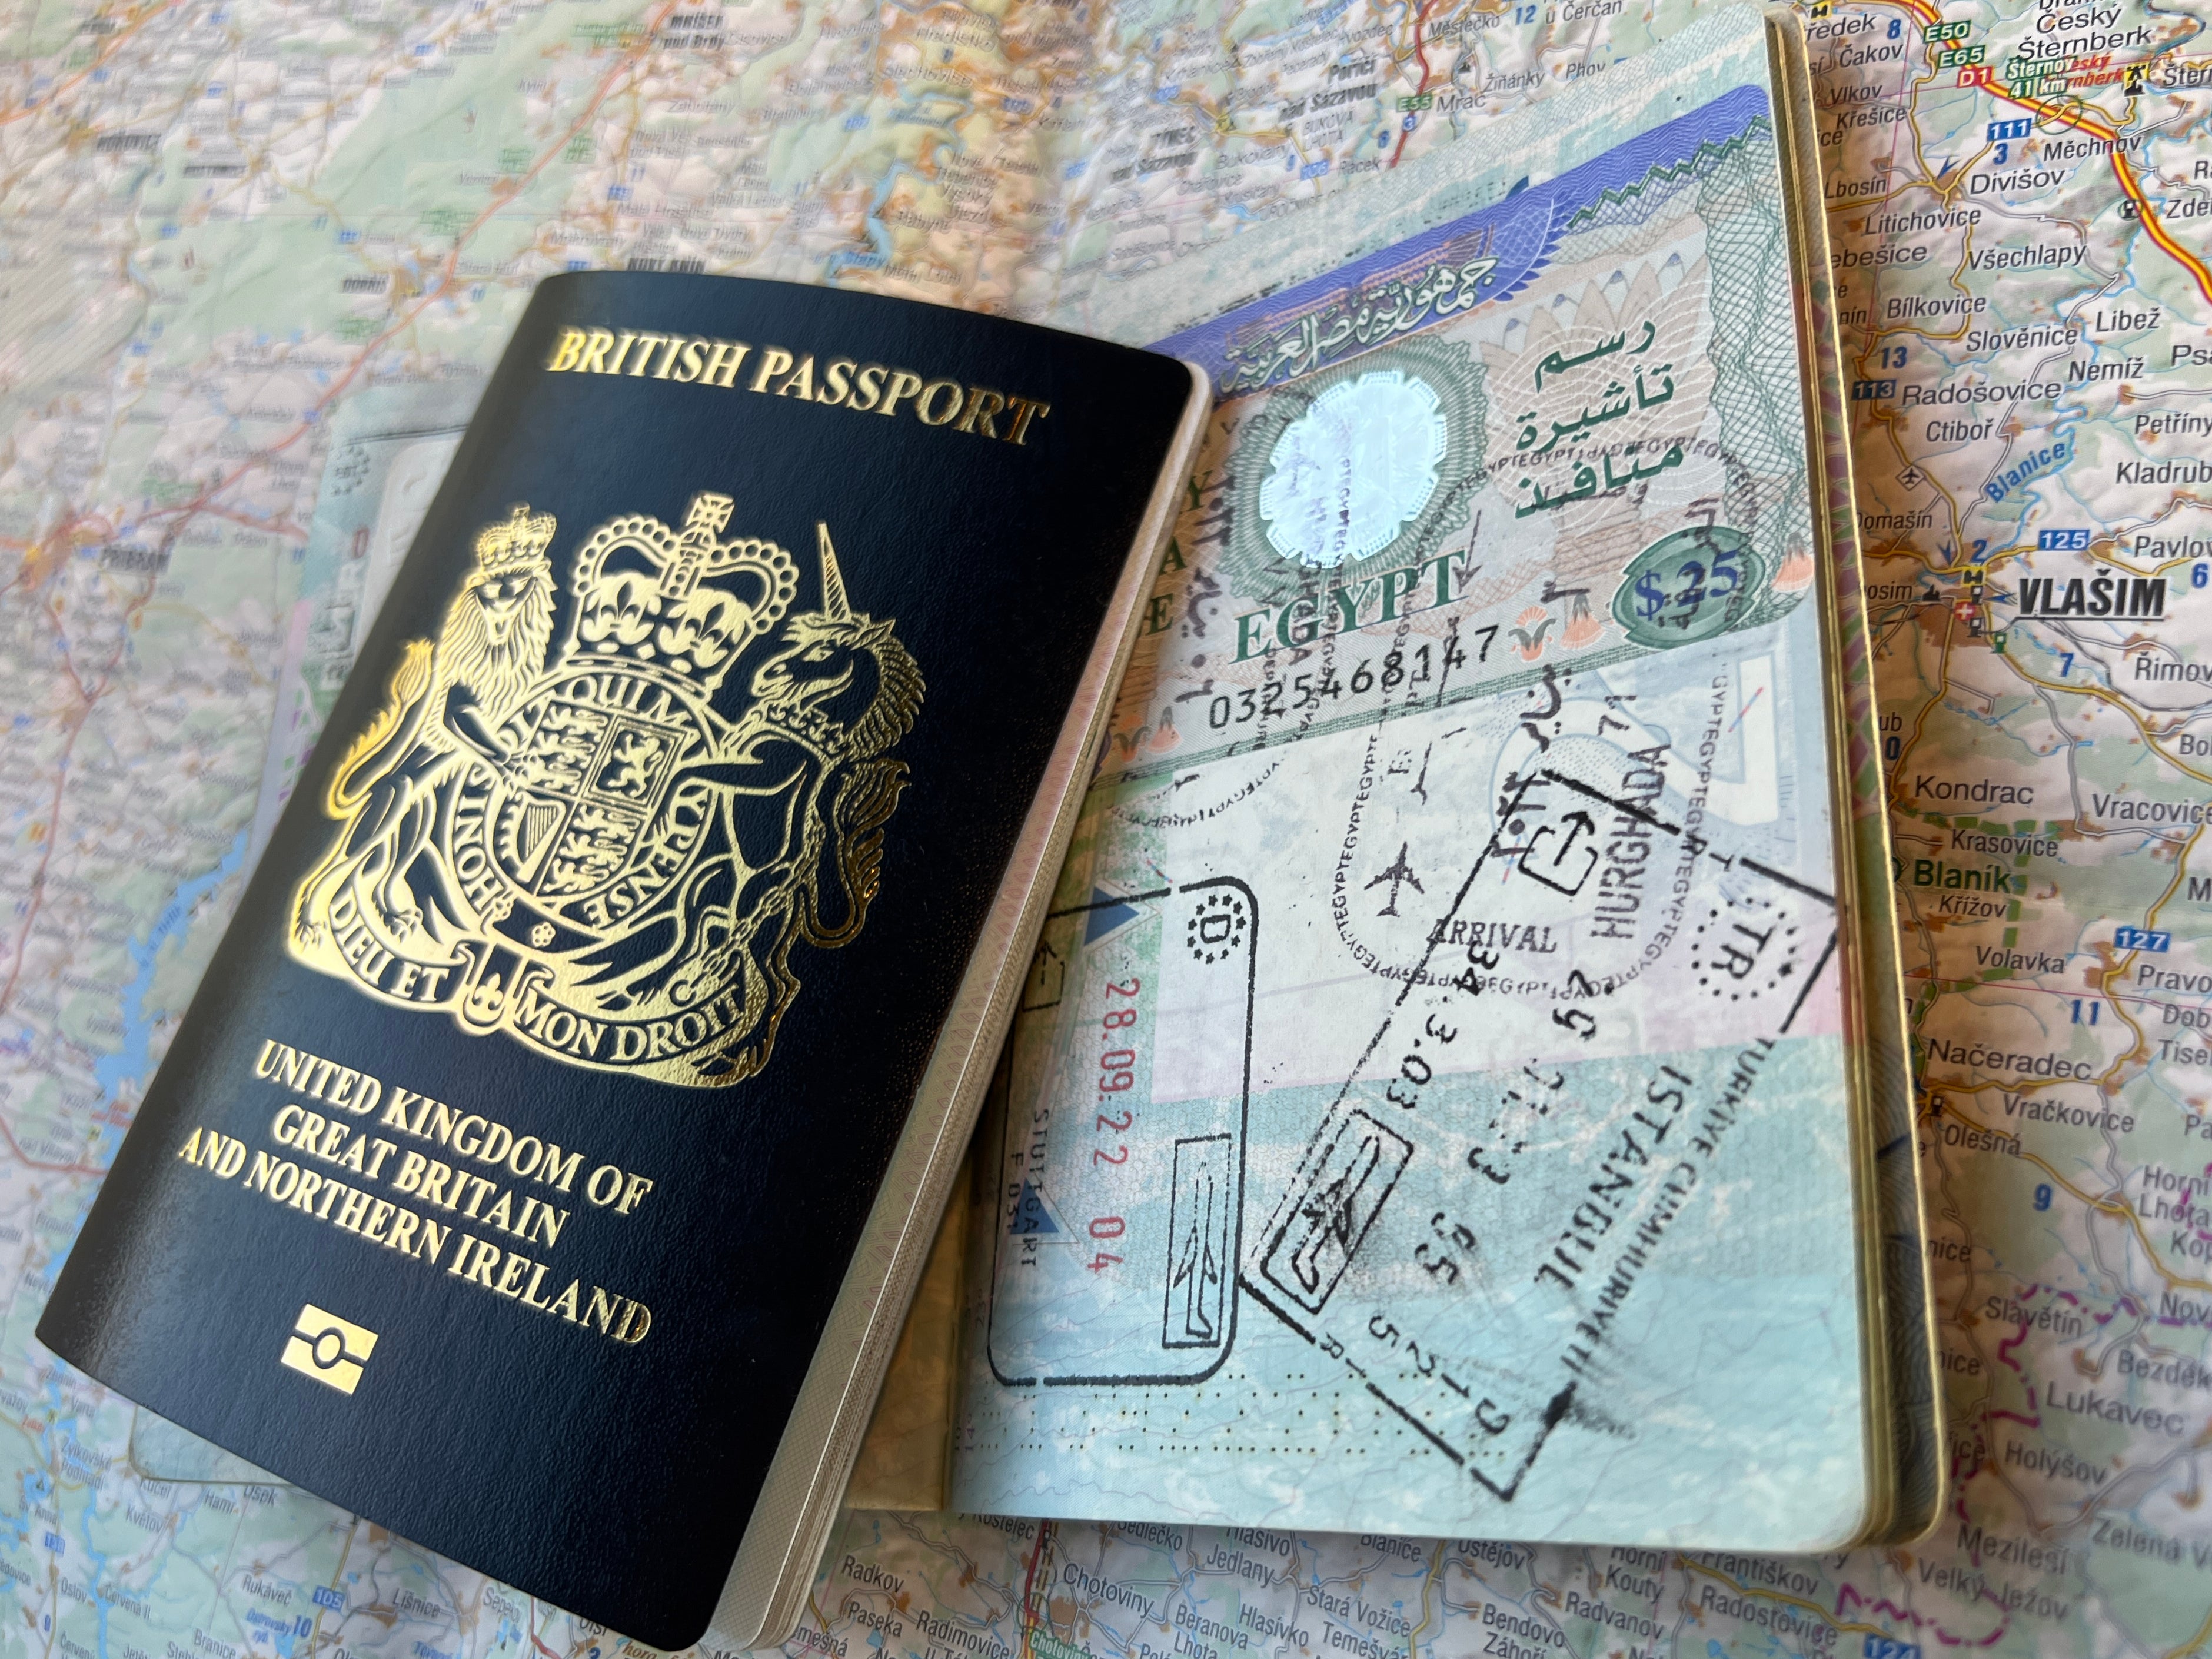 Stamp duty: After Brexit all British passports must be stamped when crossing to or from the EU